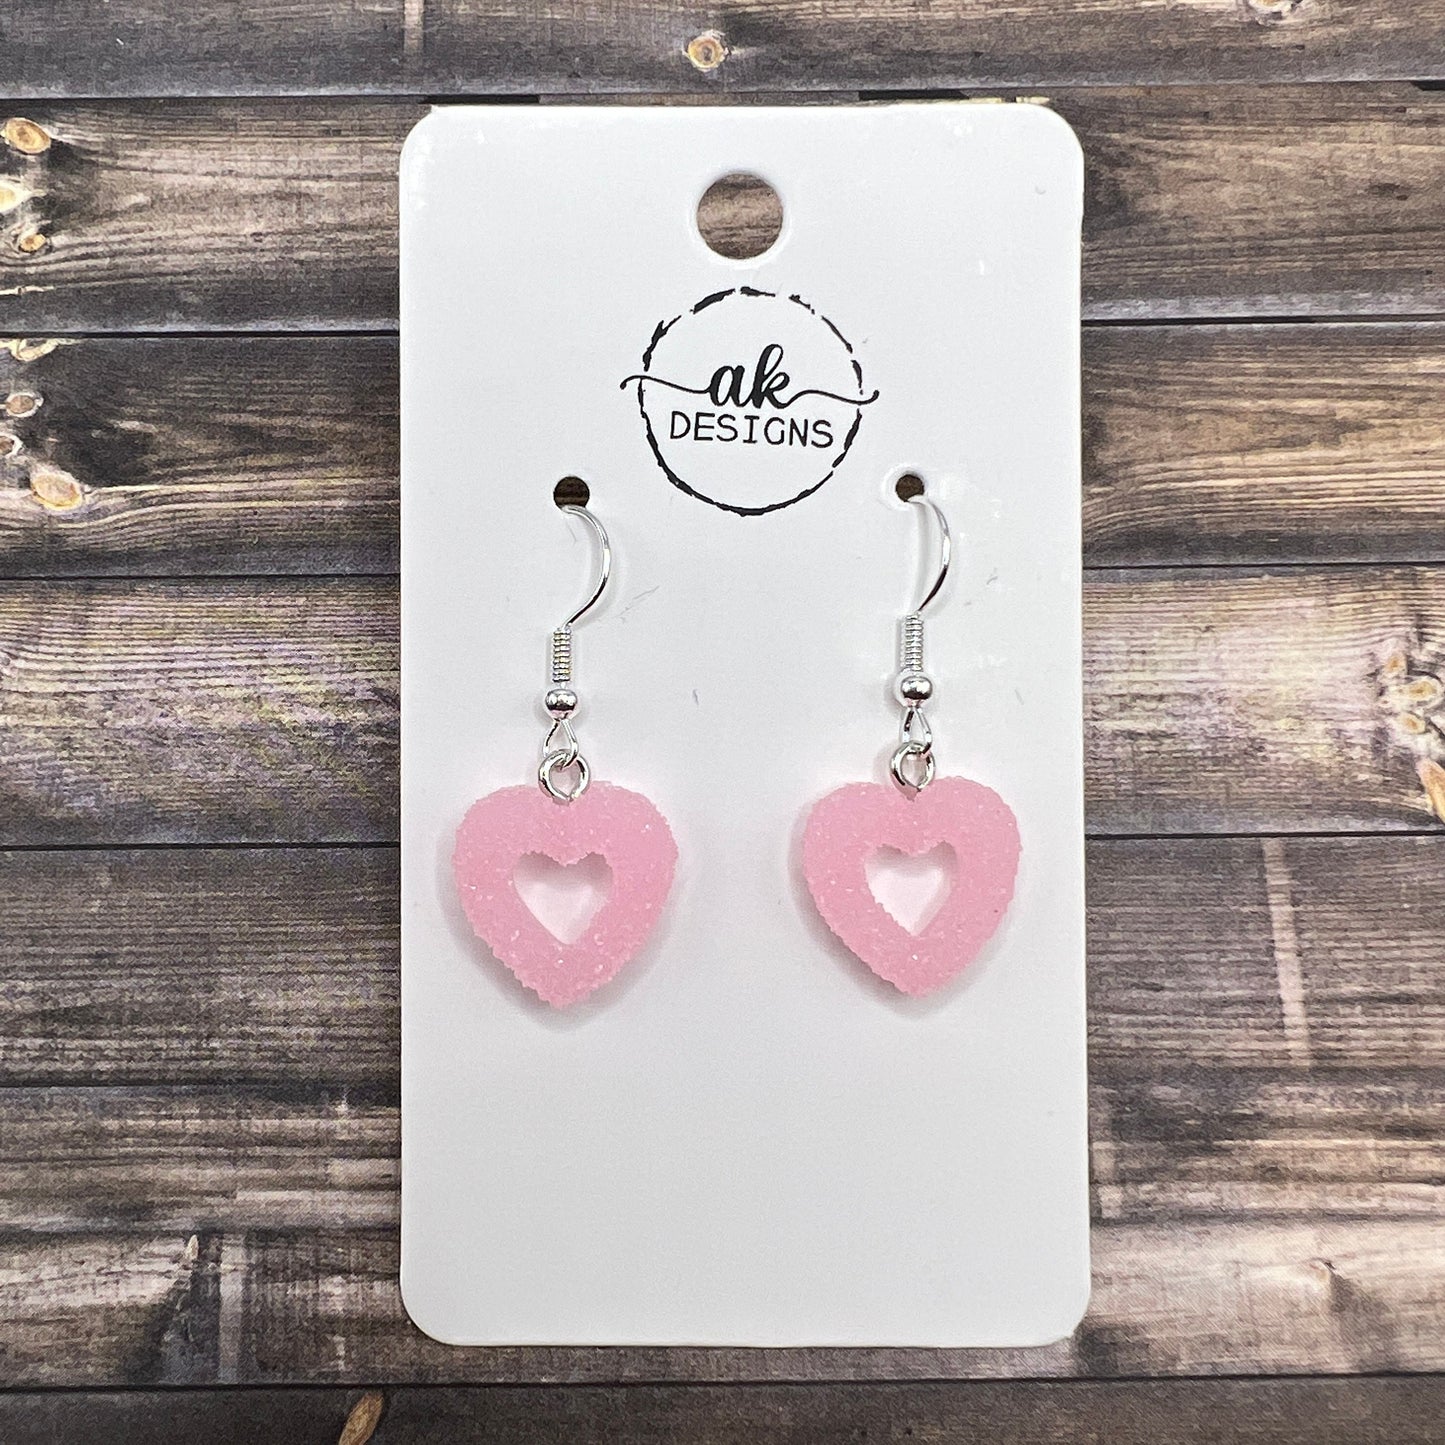 Sugar Sweet Coated Candy Hearts Darling Hypoallergenic Valentine's Day Love Earrings